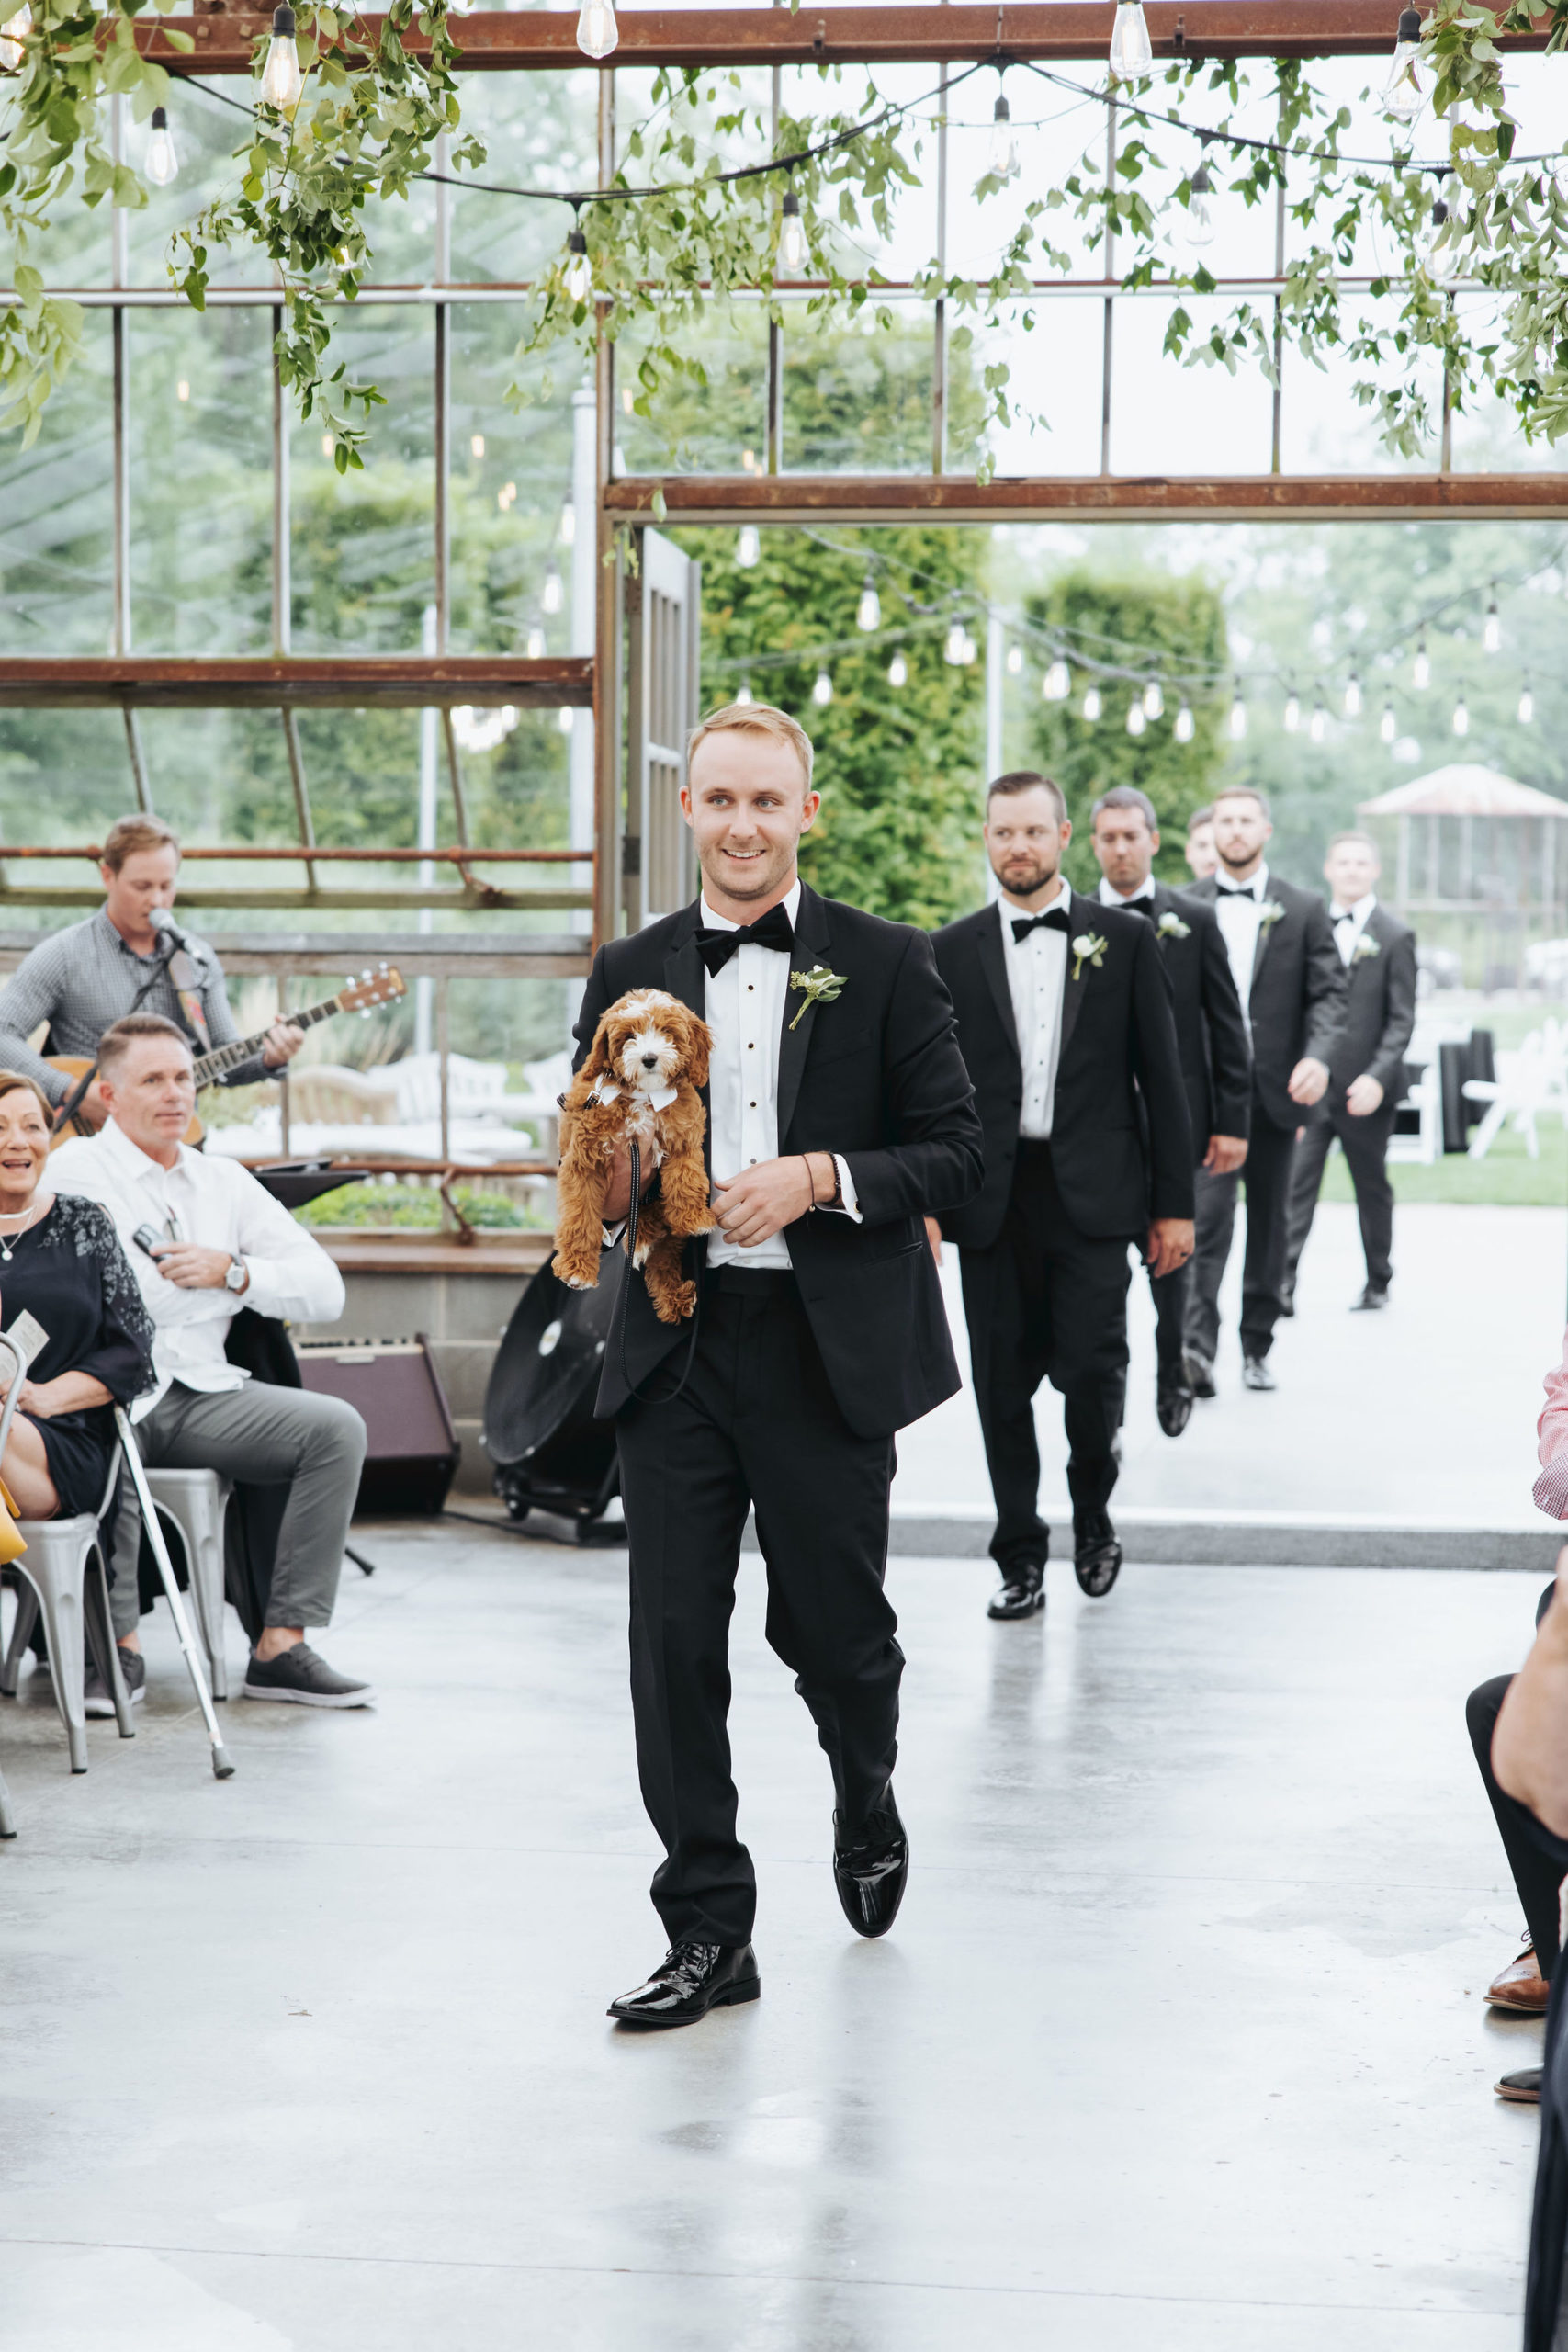 groomsman walking down the aisle with puppy